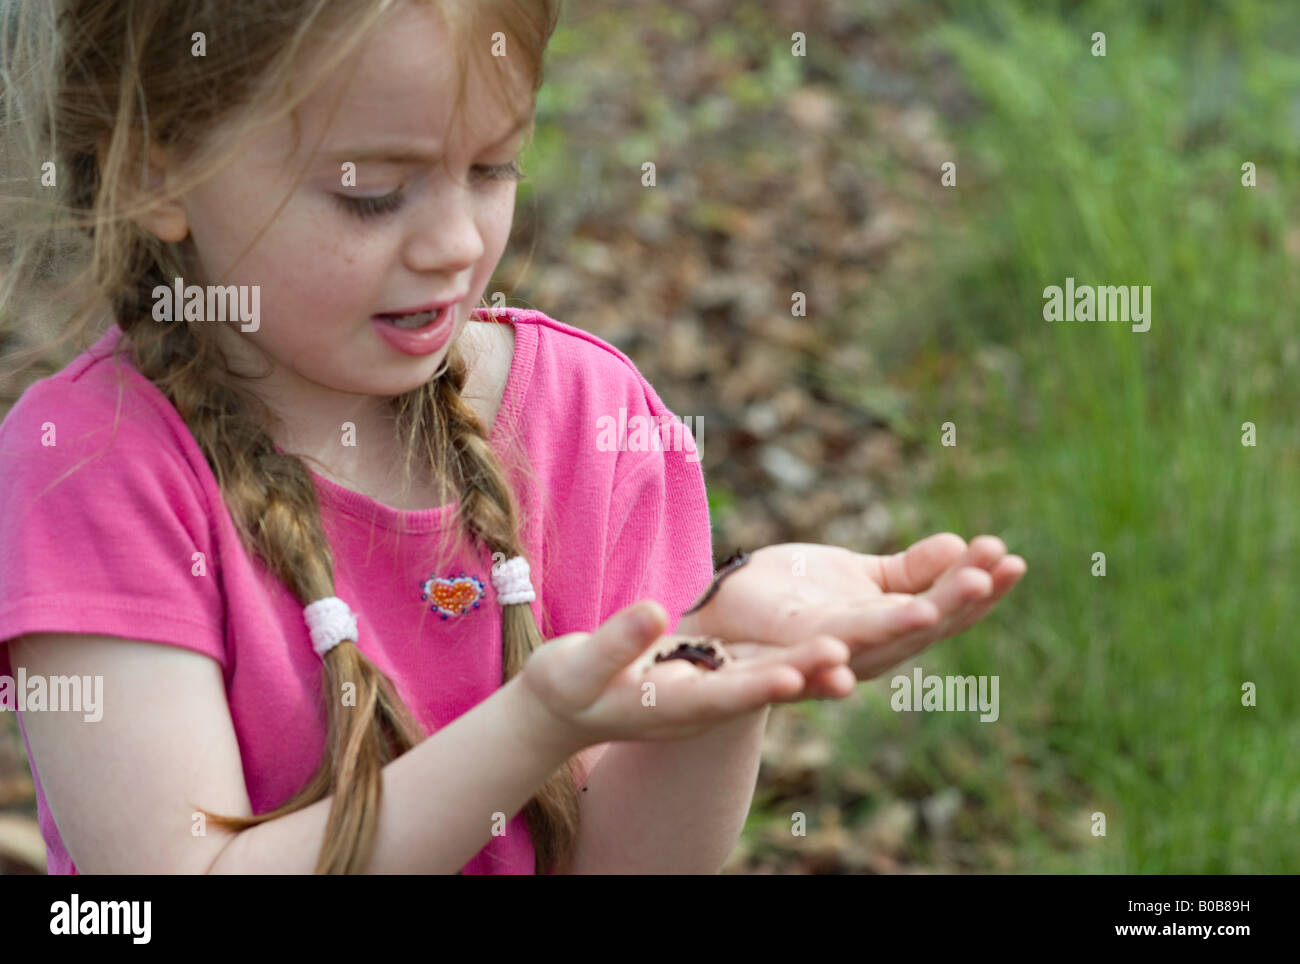 SOUTH CAROLINA YORK A beautiful young girl looking at earthworms crawling in her open hands in the middle of a forest Stock Photo